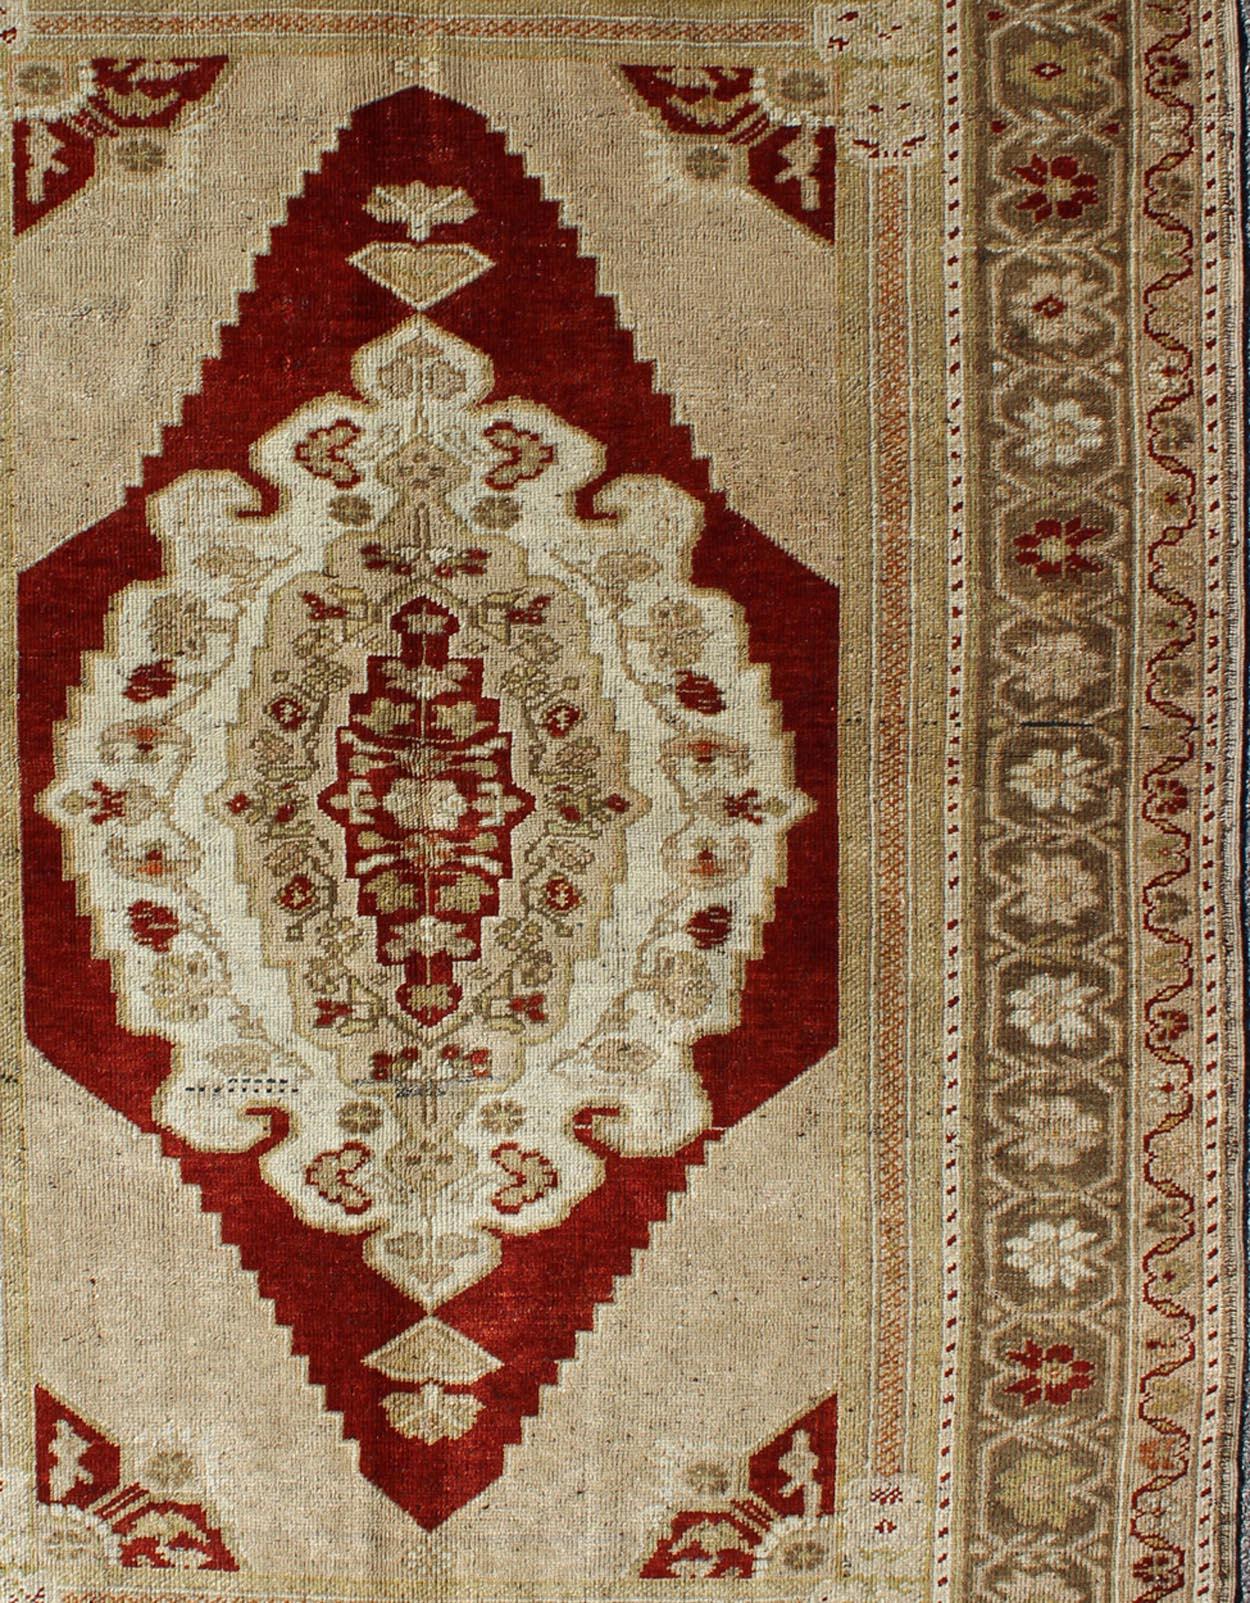 Measures: 4'10 x 7'4

This vintage, midcentury Turkish Oushak rug features an intricately beautiful design with a traditional aesthetic. The central medallion is surrounded by multi-layers in the central field. The various shades of tan, taupe,